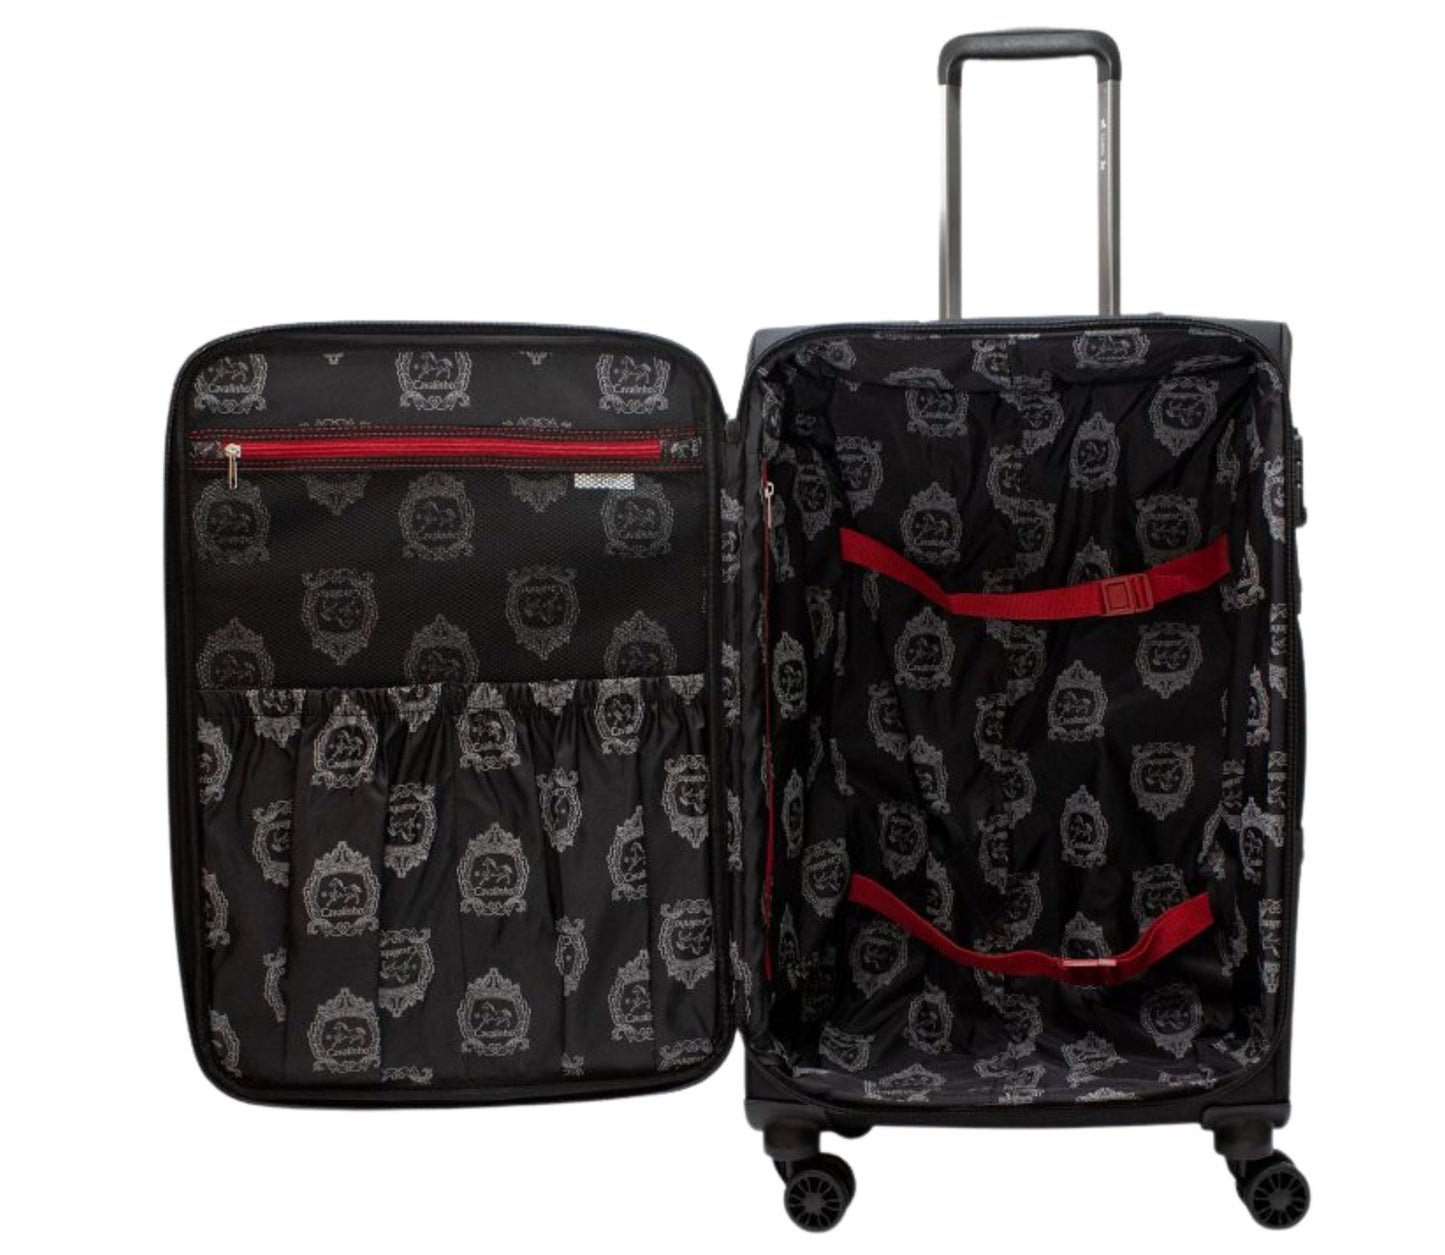 Cavalinho Check-in Softside Luggage (24" or 28") - 24 inch Black - 68020003.01.24_P04